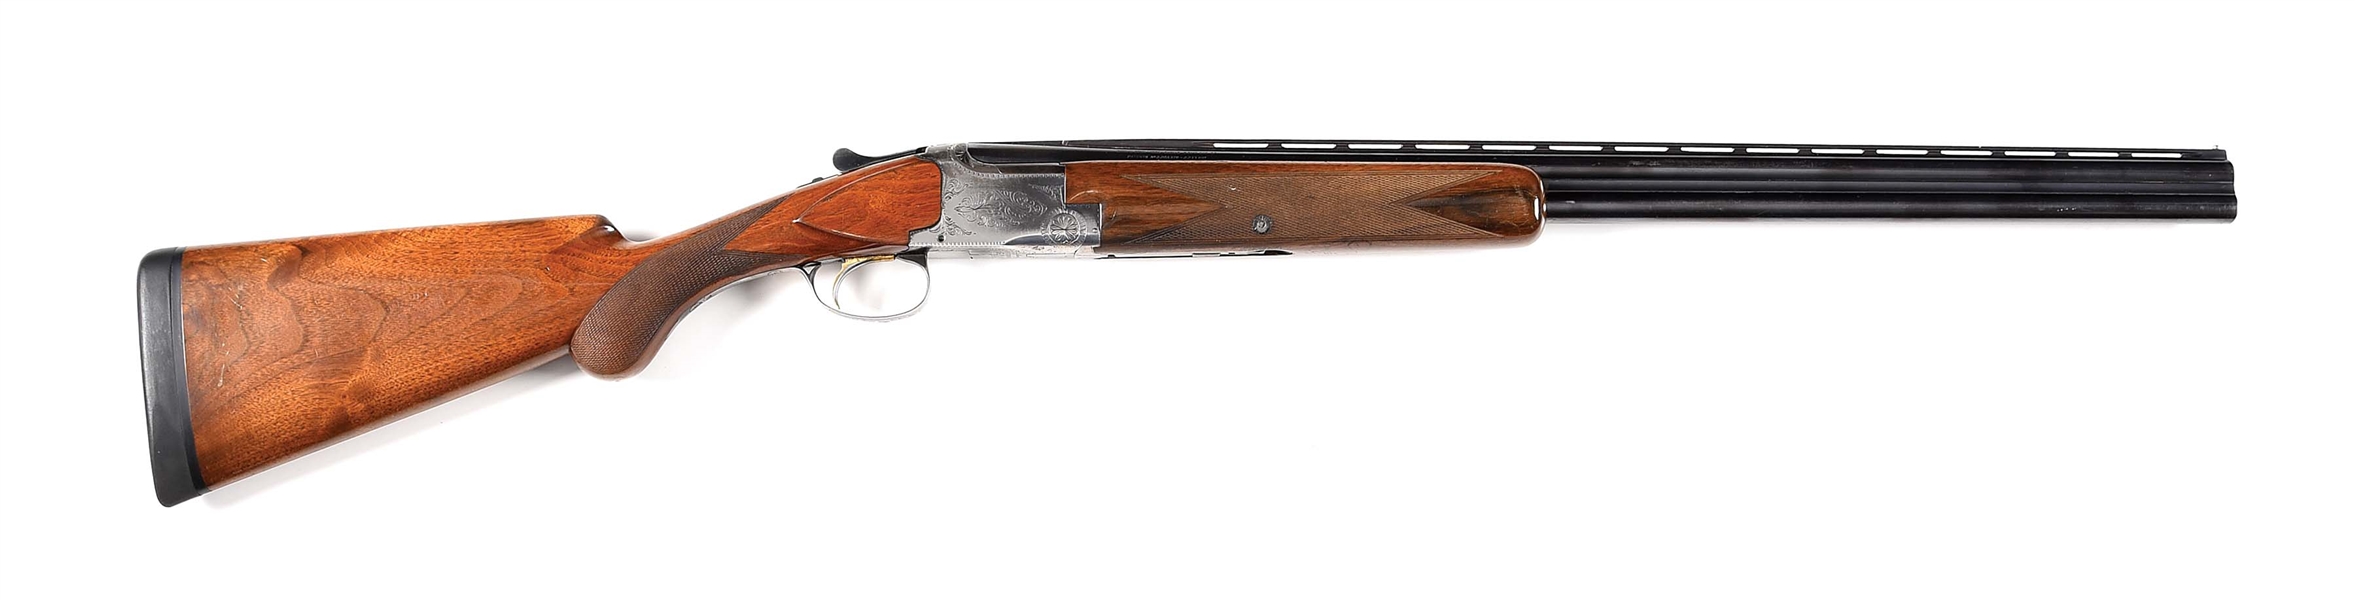 (C) BROWNING SUPERPOSED LIGHTNING 20 BORE OVER UNDER SHOTGUN WITH CASE.